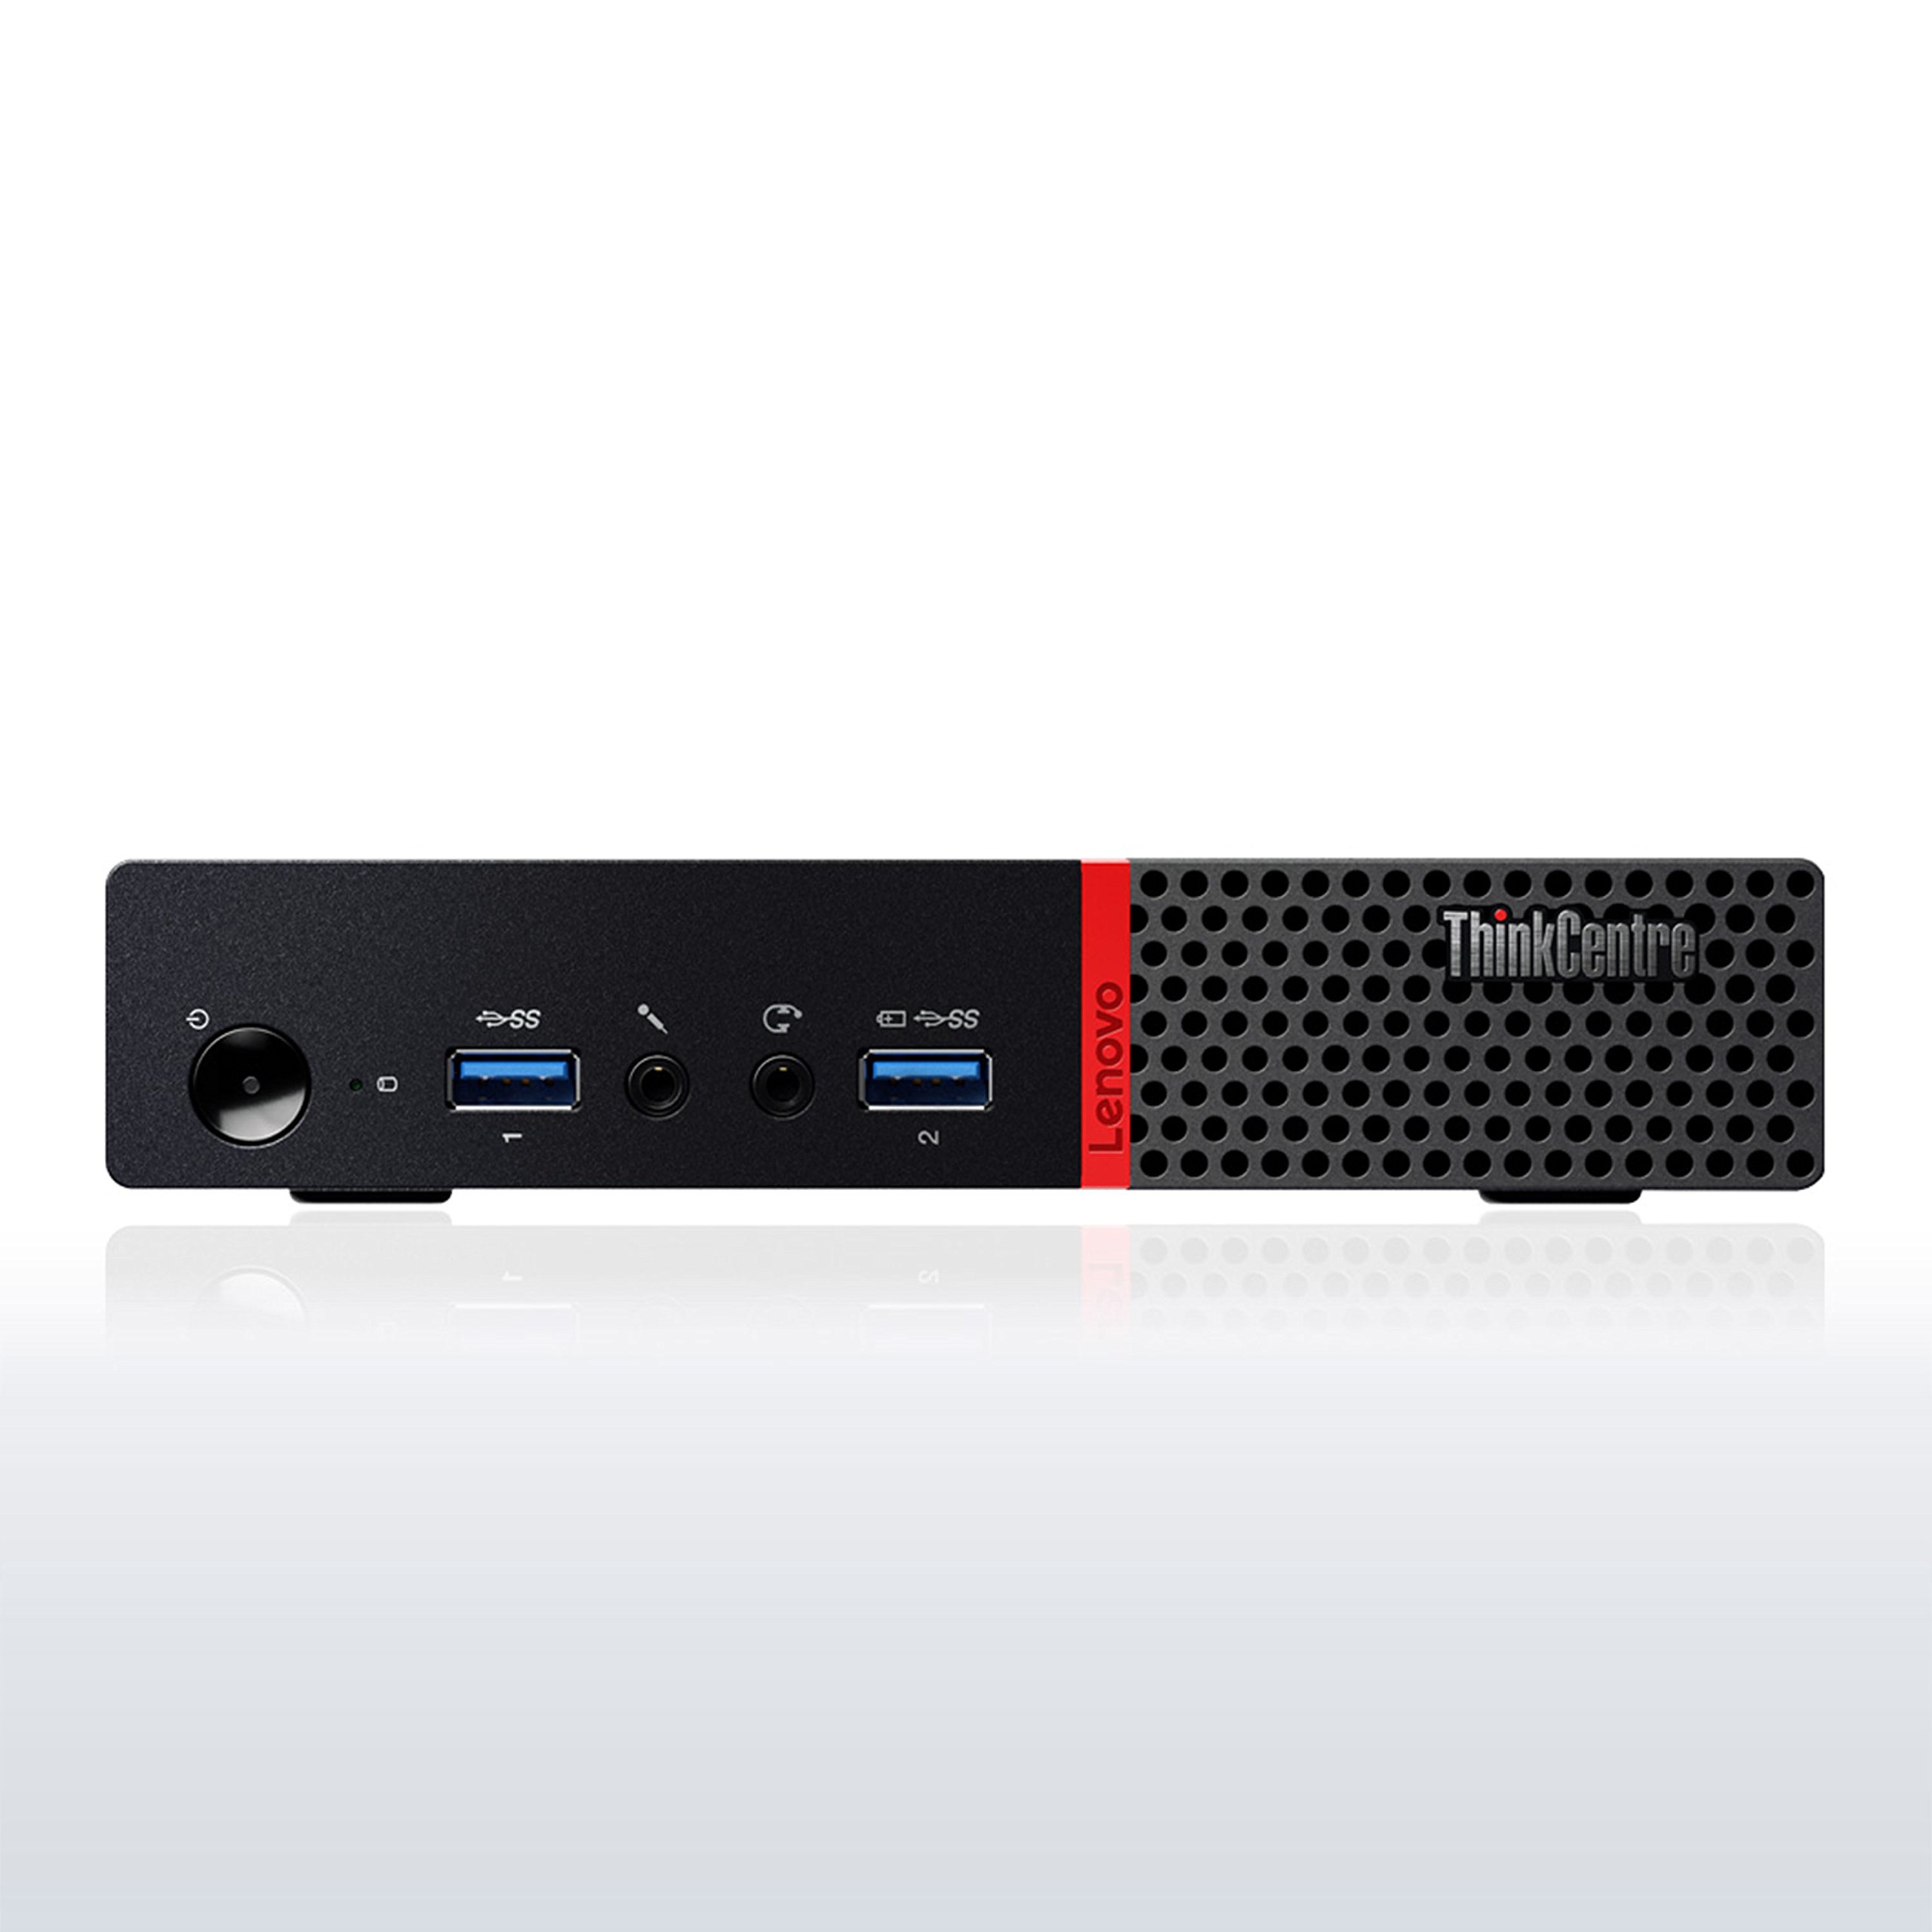 Lenovo ThinkCentre M900 Tiny Business PC, Intel Quad Core i5 6600T up to 3.5GHz, 16G DDR4, 512G SSD, WiFi, BT 4.0, Windows 10 Pro 64-Multi-Language Support English/Spanish/French(Renewed)